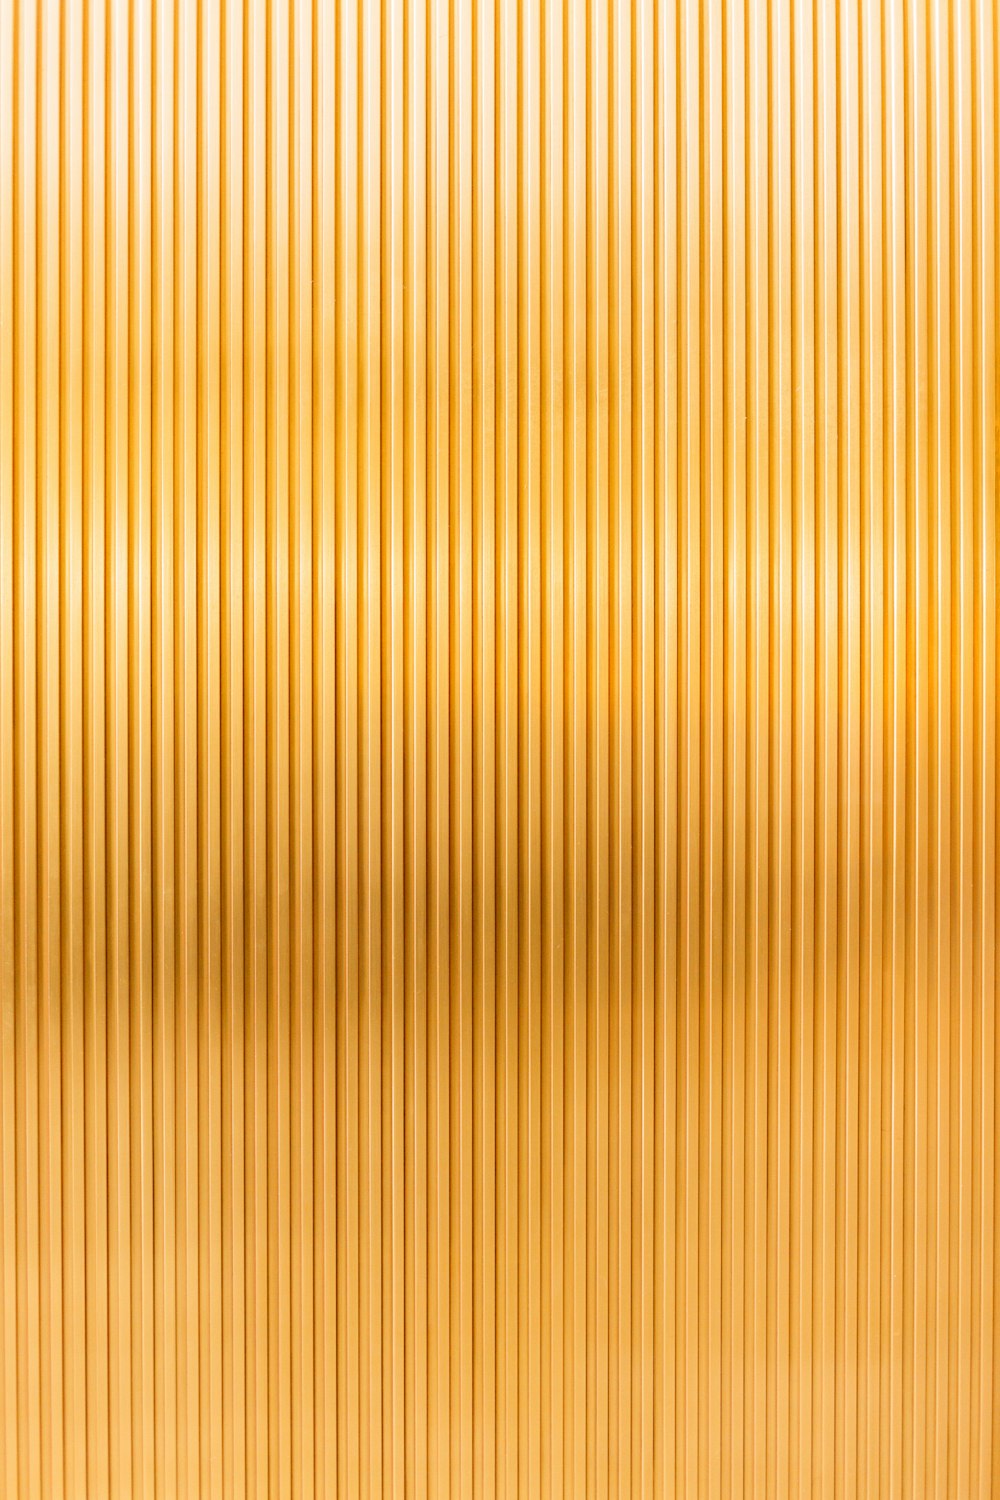 550+ Gold Background Pictures | Download Free Images on Unsplash